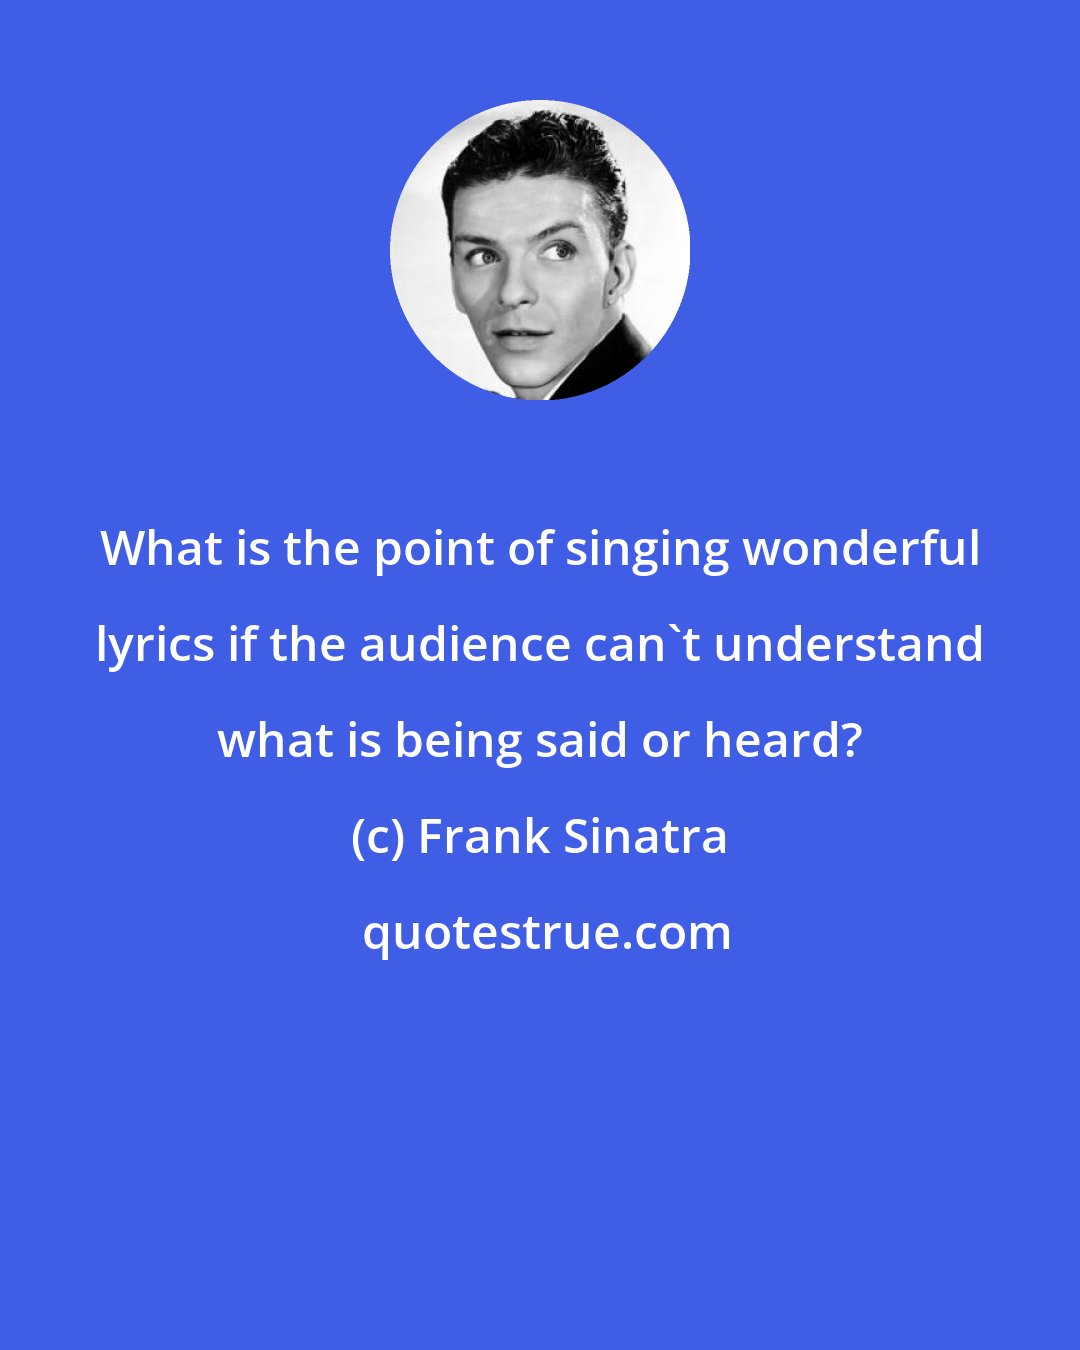 Frank Sinatra: What is the point of singing wonderful lyrics if the audience can't understand what is being said or heard?